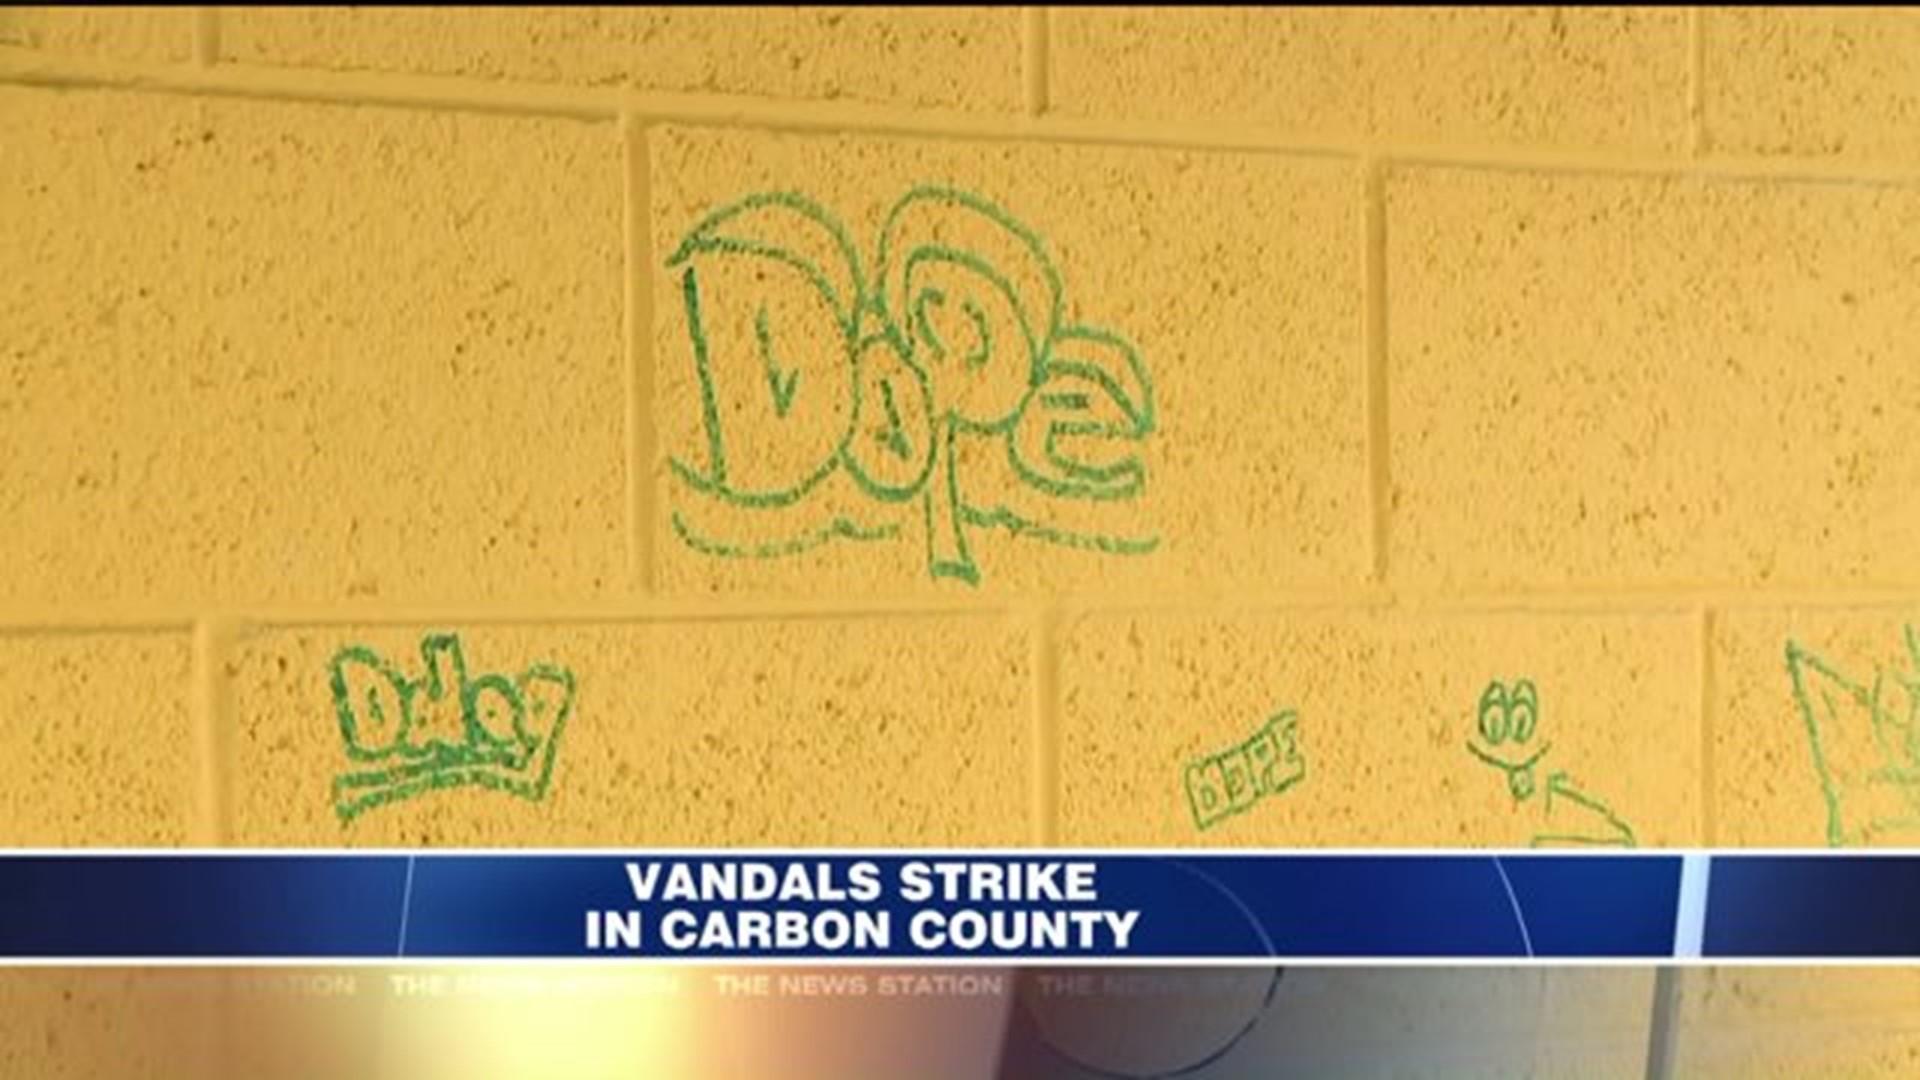 Vandalism in Carbon County